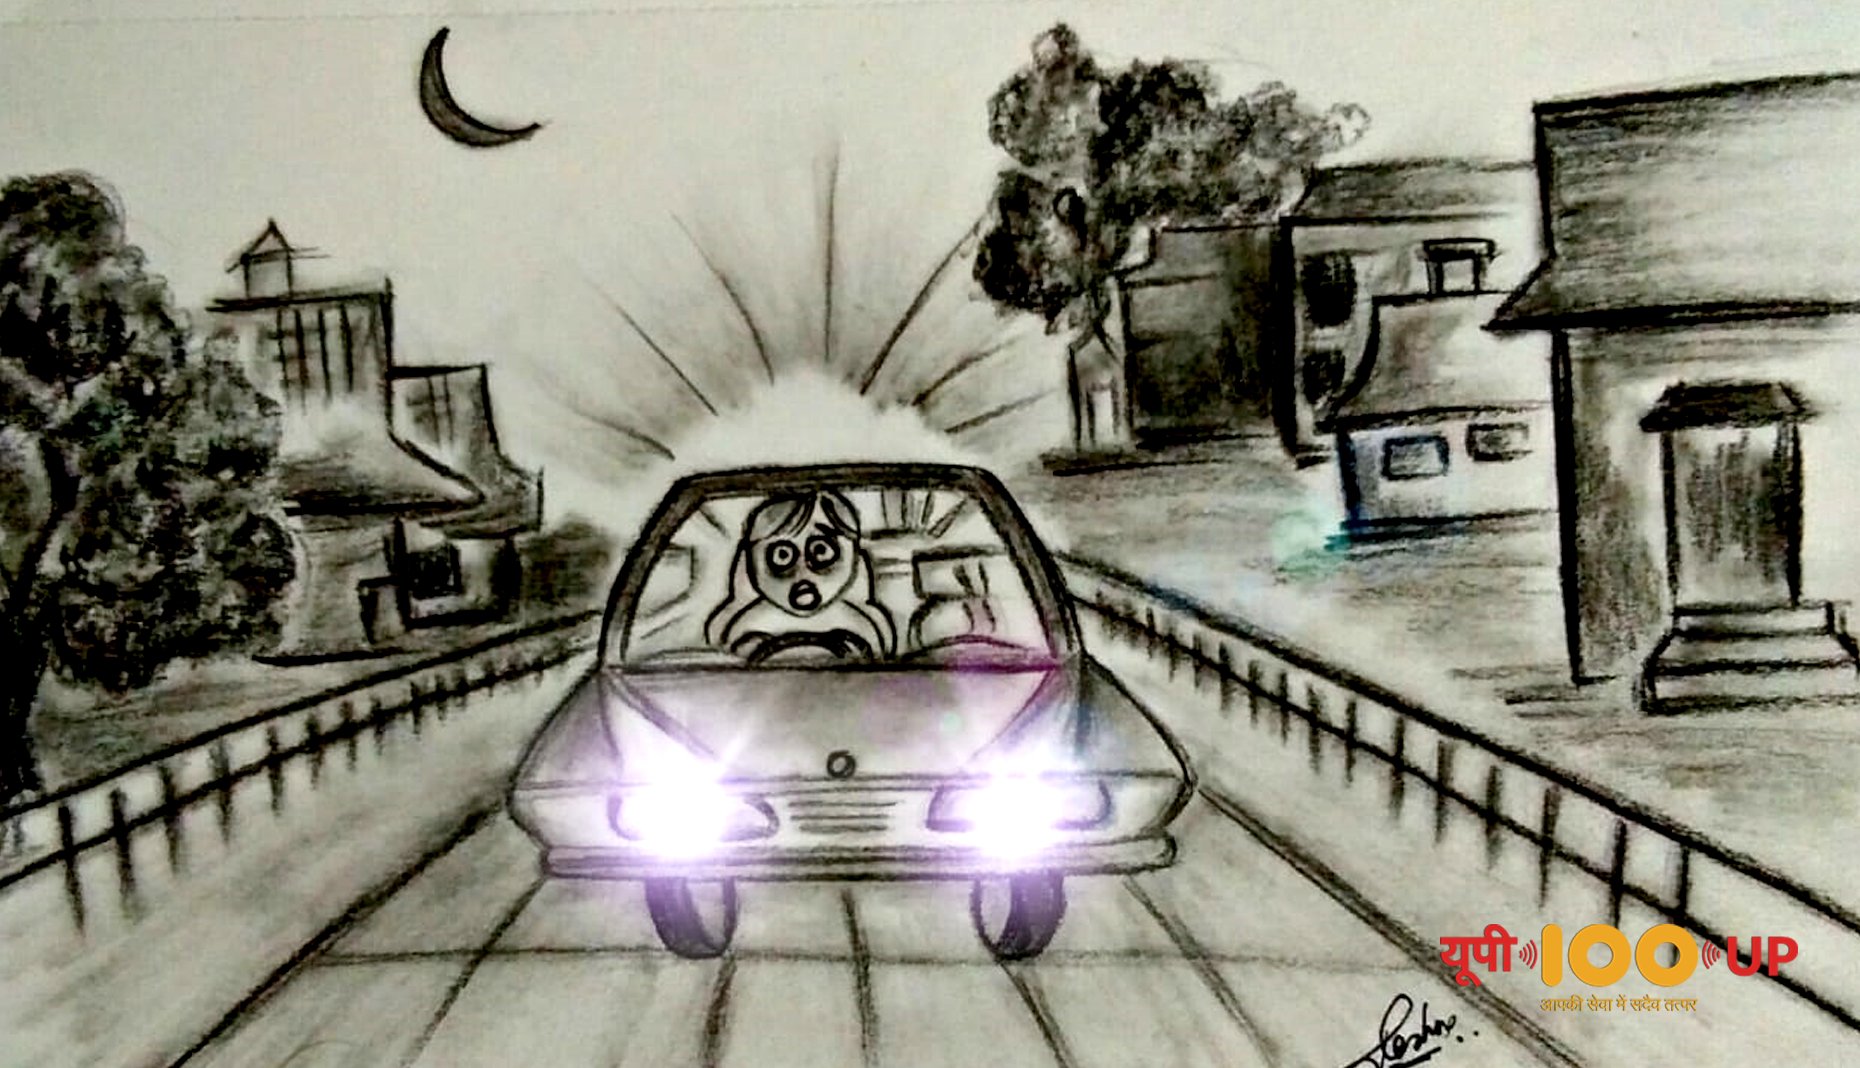 Road Safety Drawing Scene for School Kids Step by Step Easy - YouTube